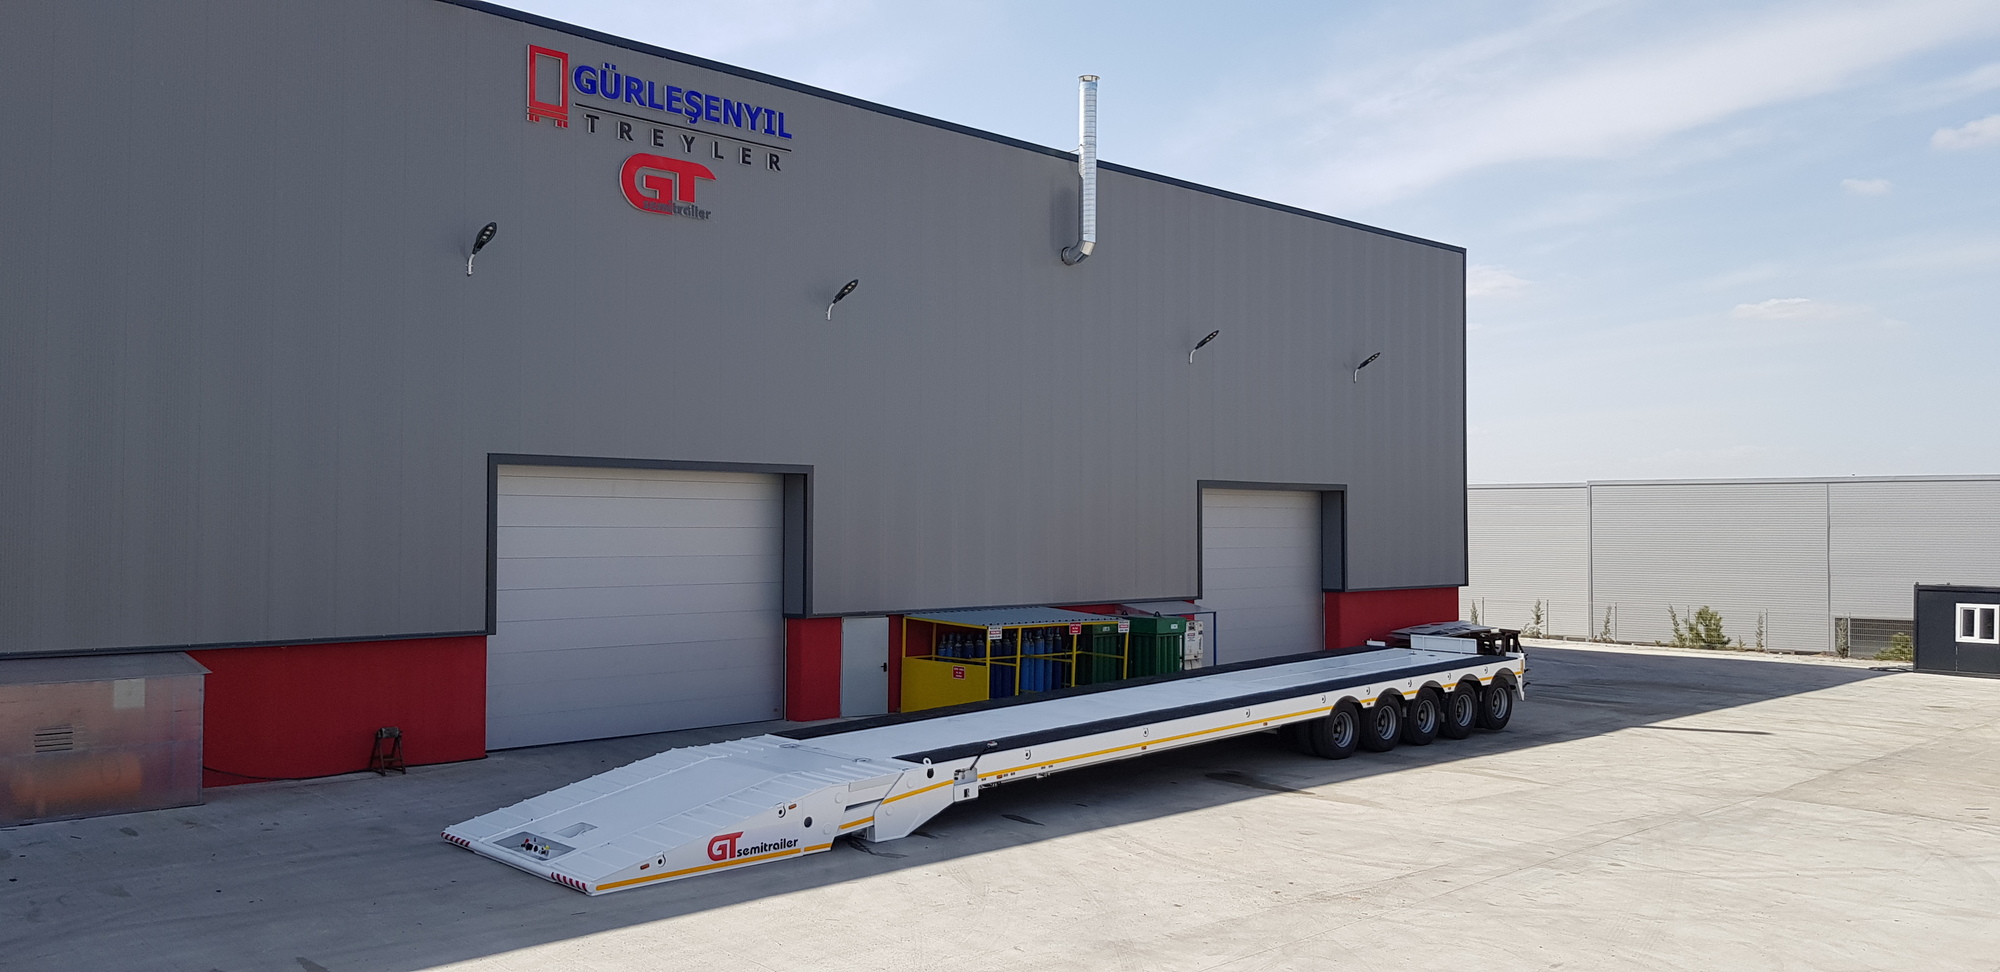 Gurlesenyil Trailers undefined: afbeelding 53